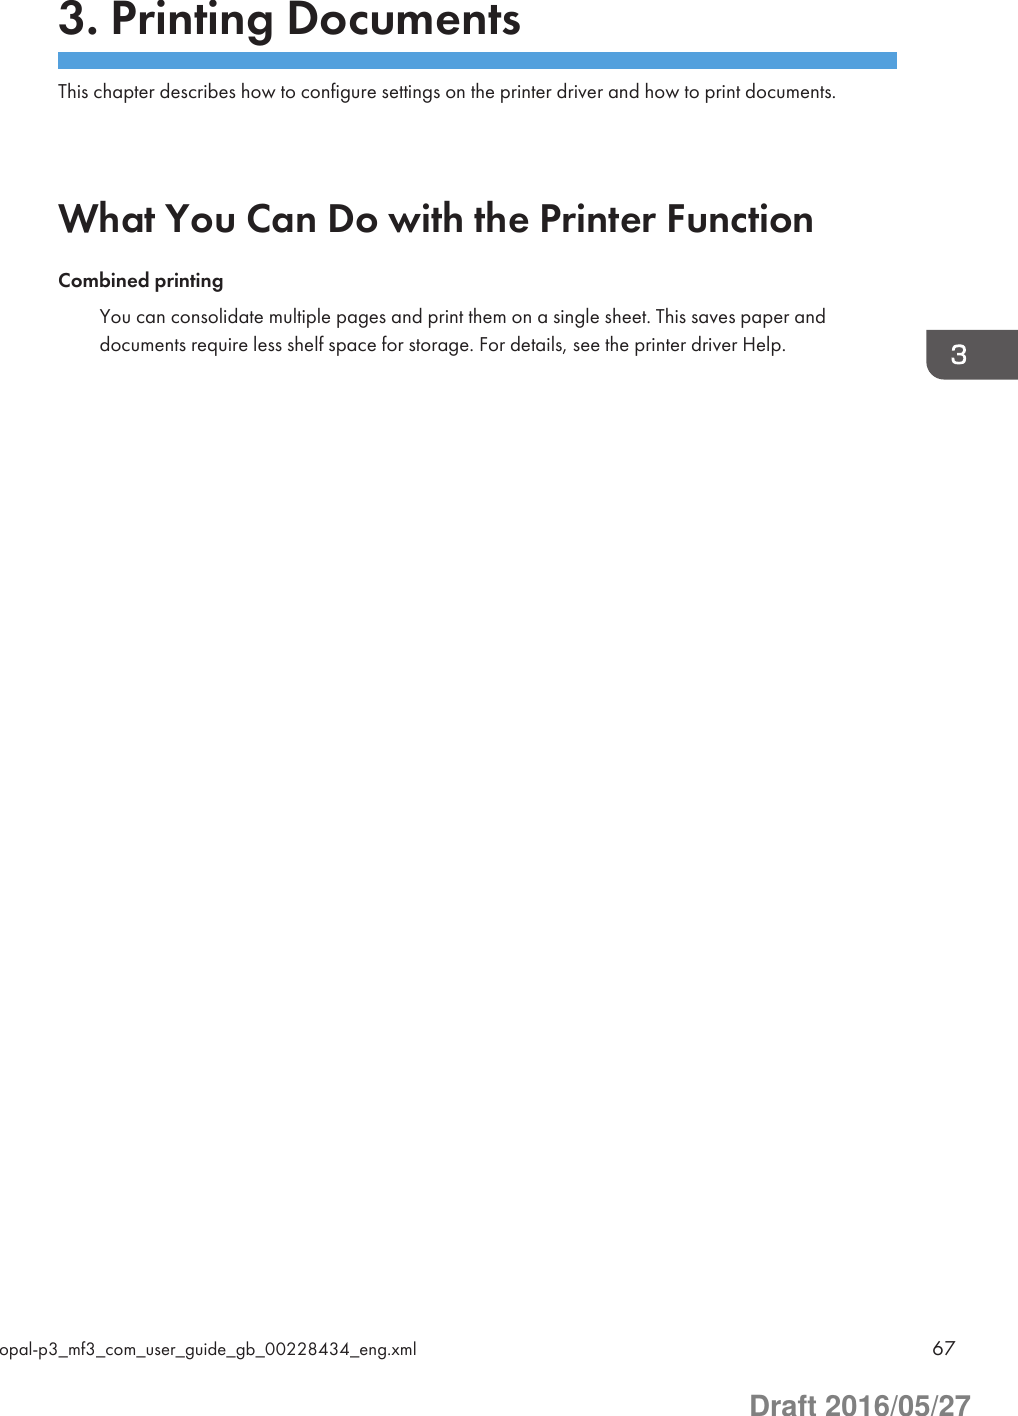 3. Printing DocumentsThis chapter describes how to configure settings on the printer driver and how to print documents.What You Can Do with the Printer FunctionCombined printingYou can consolidate multiple pages and print them on a single sheet. This saves paper anddocuments require less shelf space for storage. For details, see the printer driver Help.opal-p3_mf3_com_user_guide_gb_00228434_eng.xml 67Draft 2016/05/27